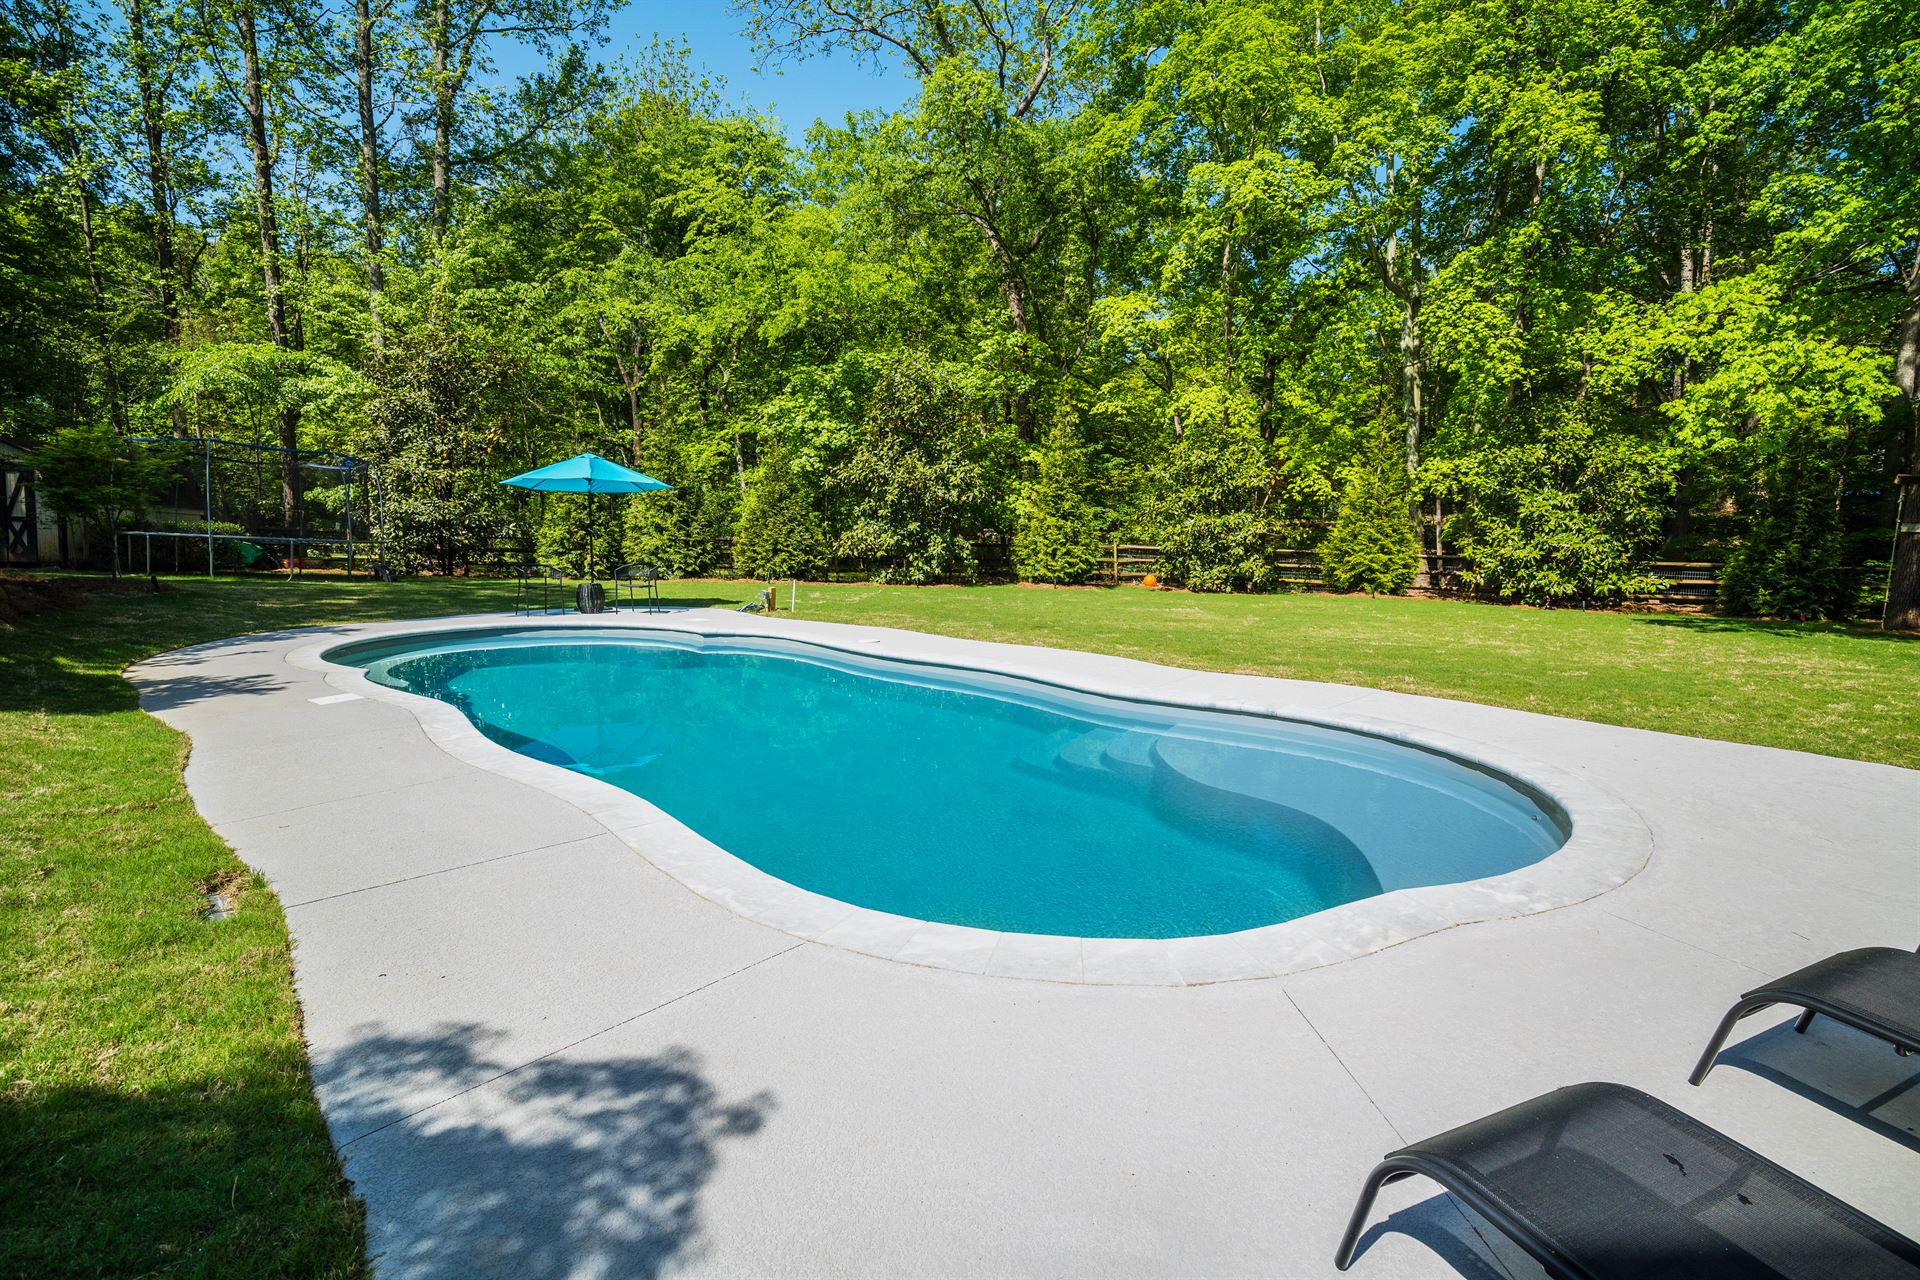 River Pools C40 in Granite Gray with brushed concrete and natural stone coping